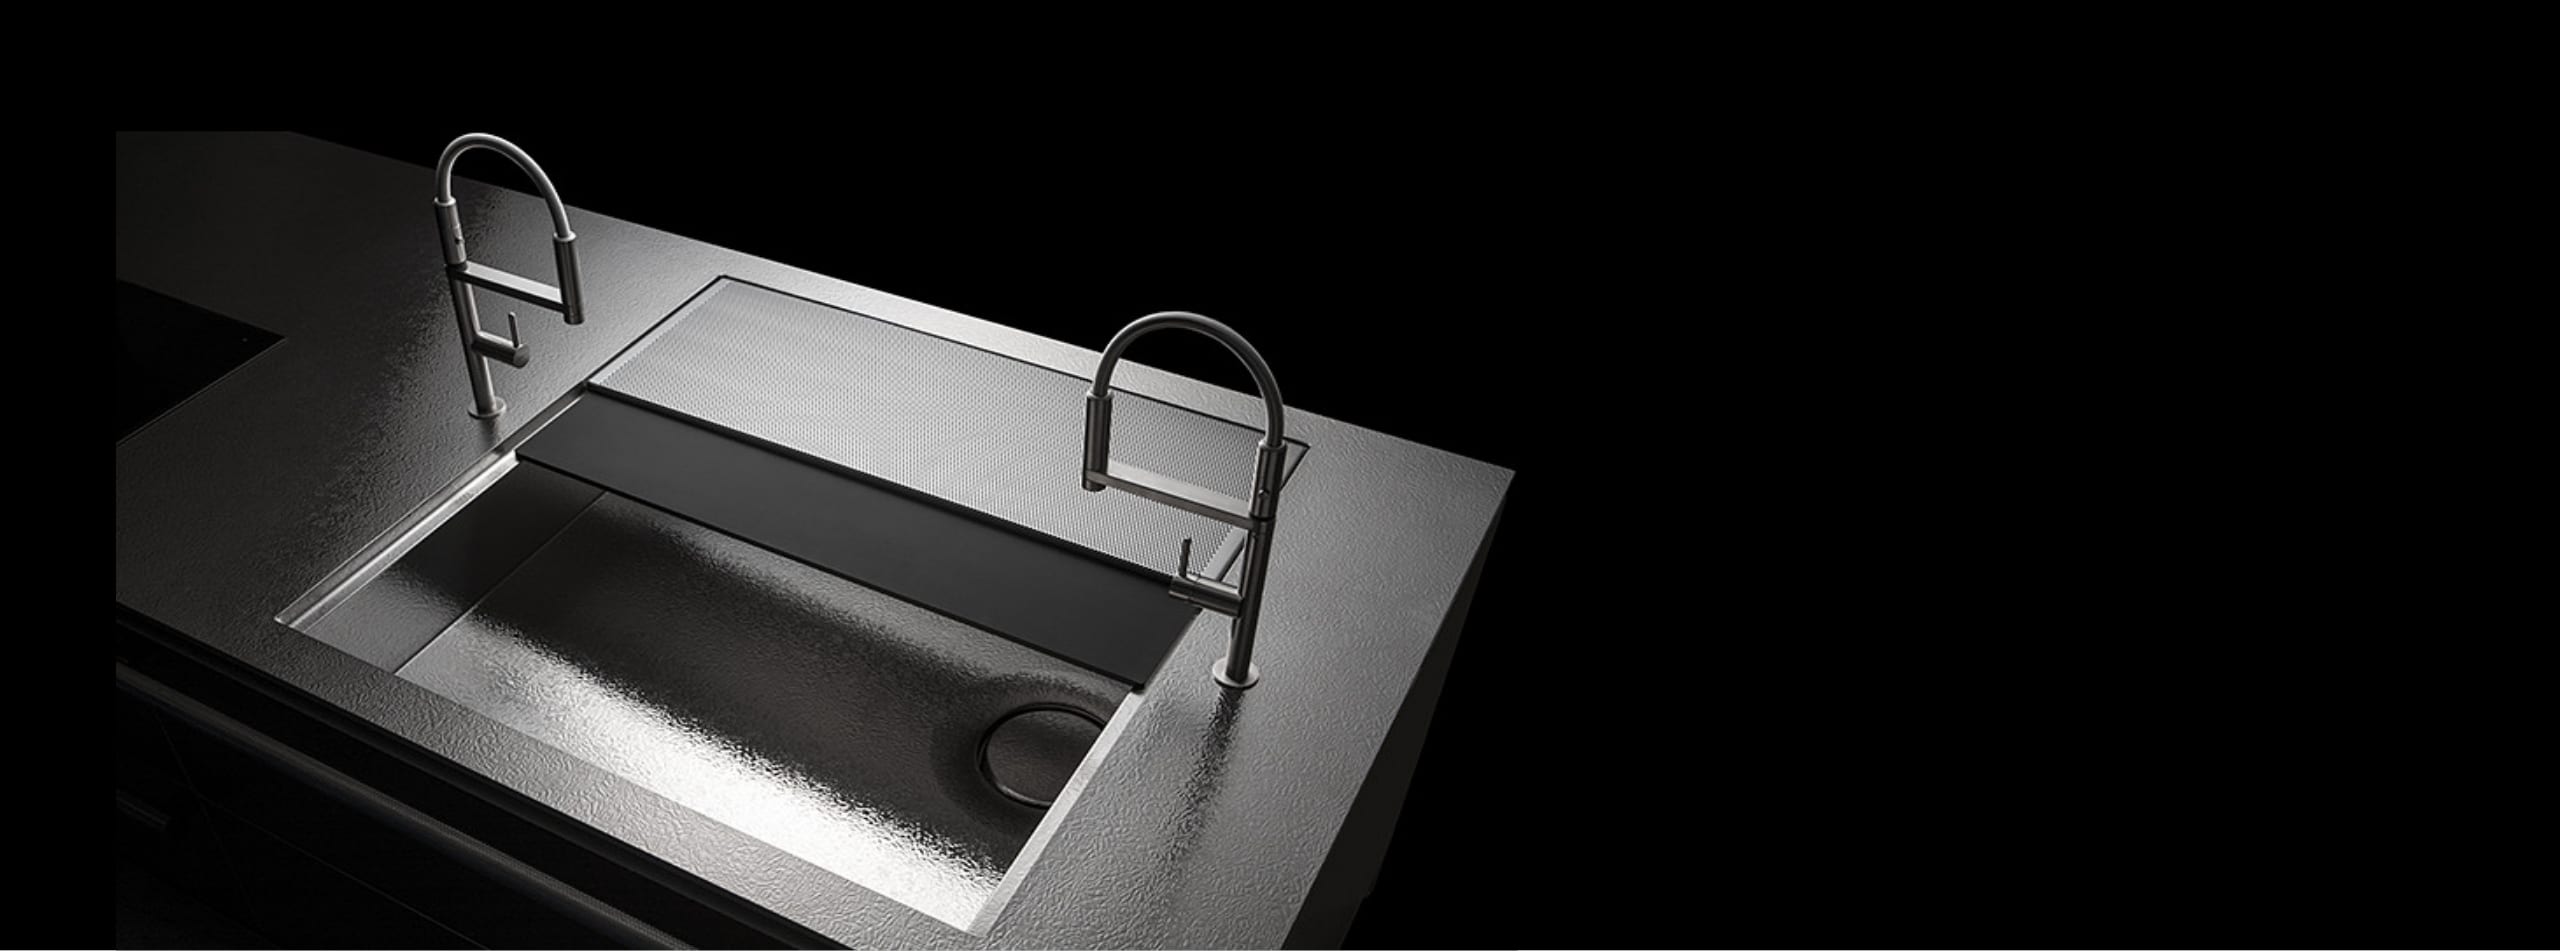 The only series that can be equipped with the new idea sink "PARALLELO"